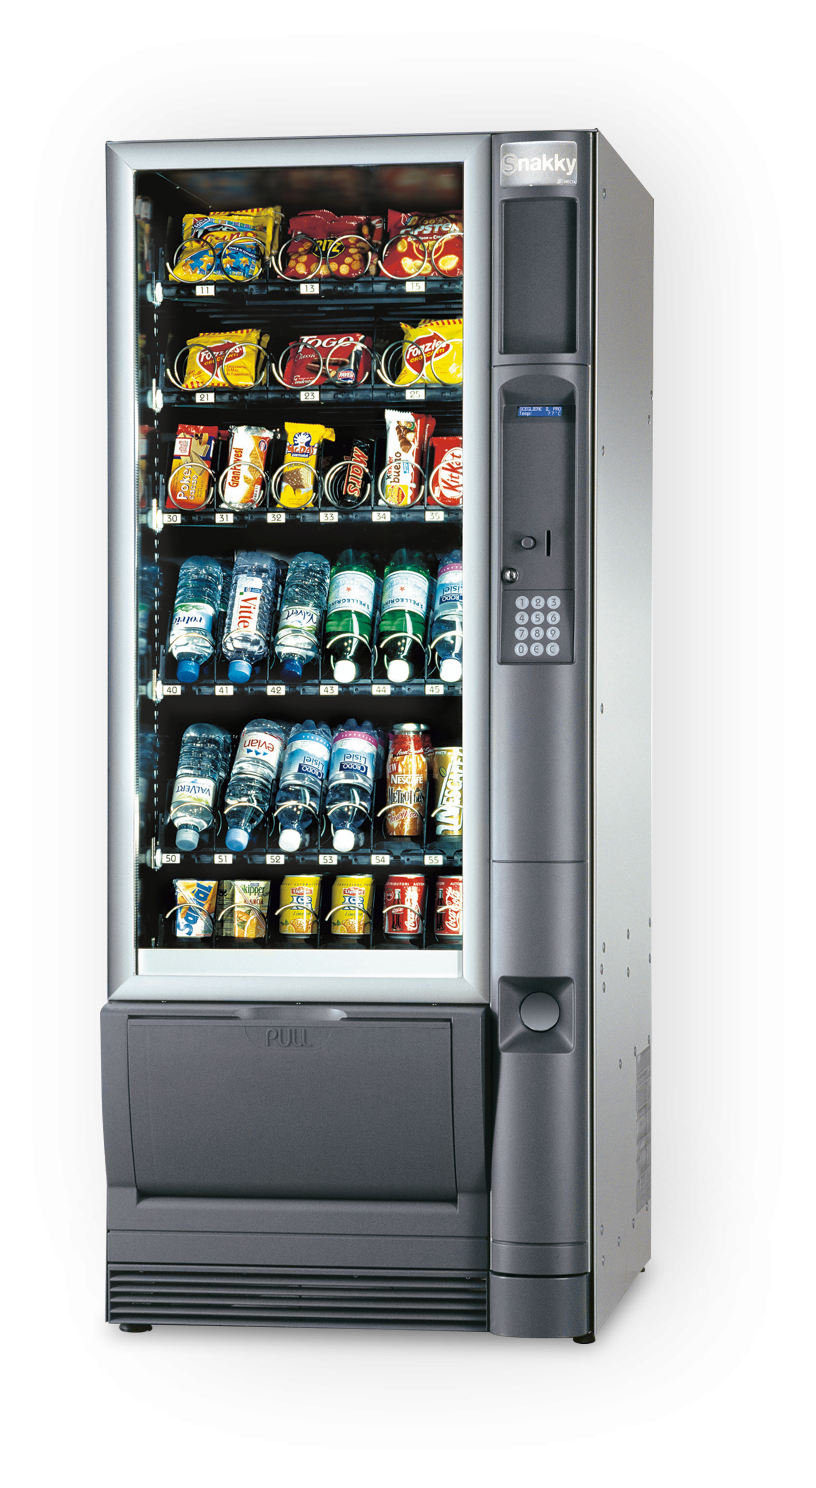 Snakky Drinks And Snack Vending Machine